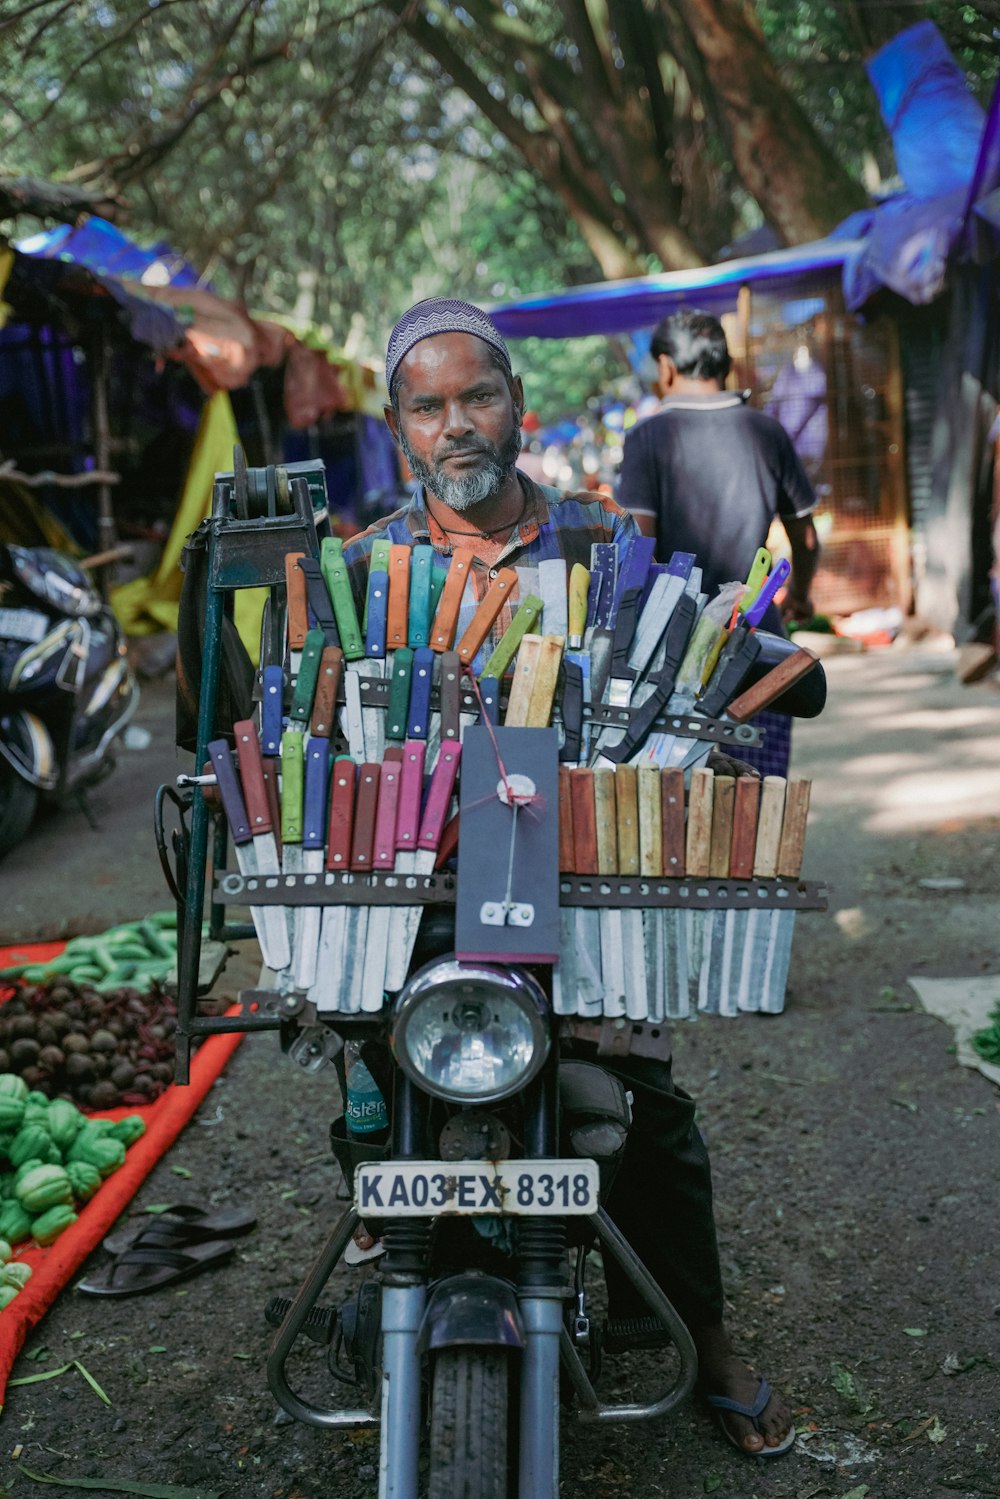 a man on a motorcycle with a basket full of crayons